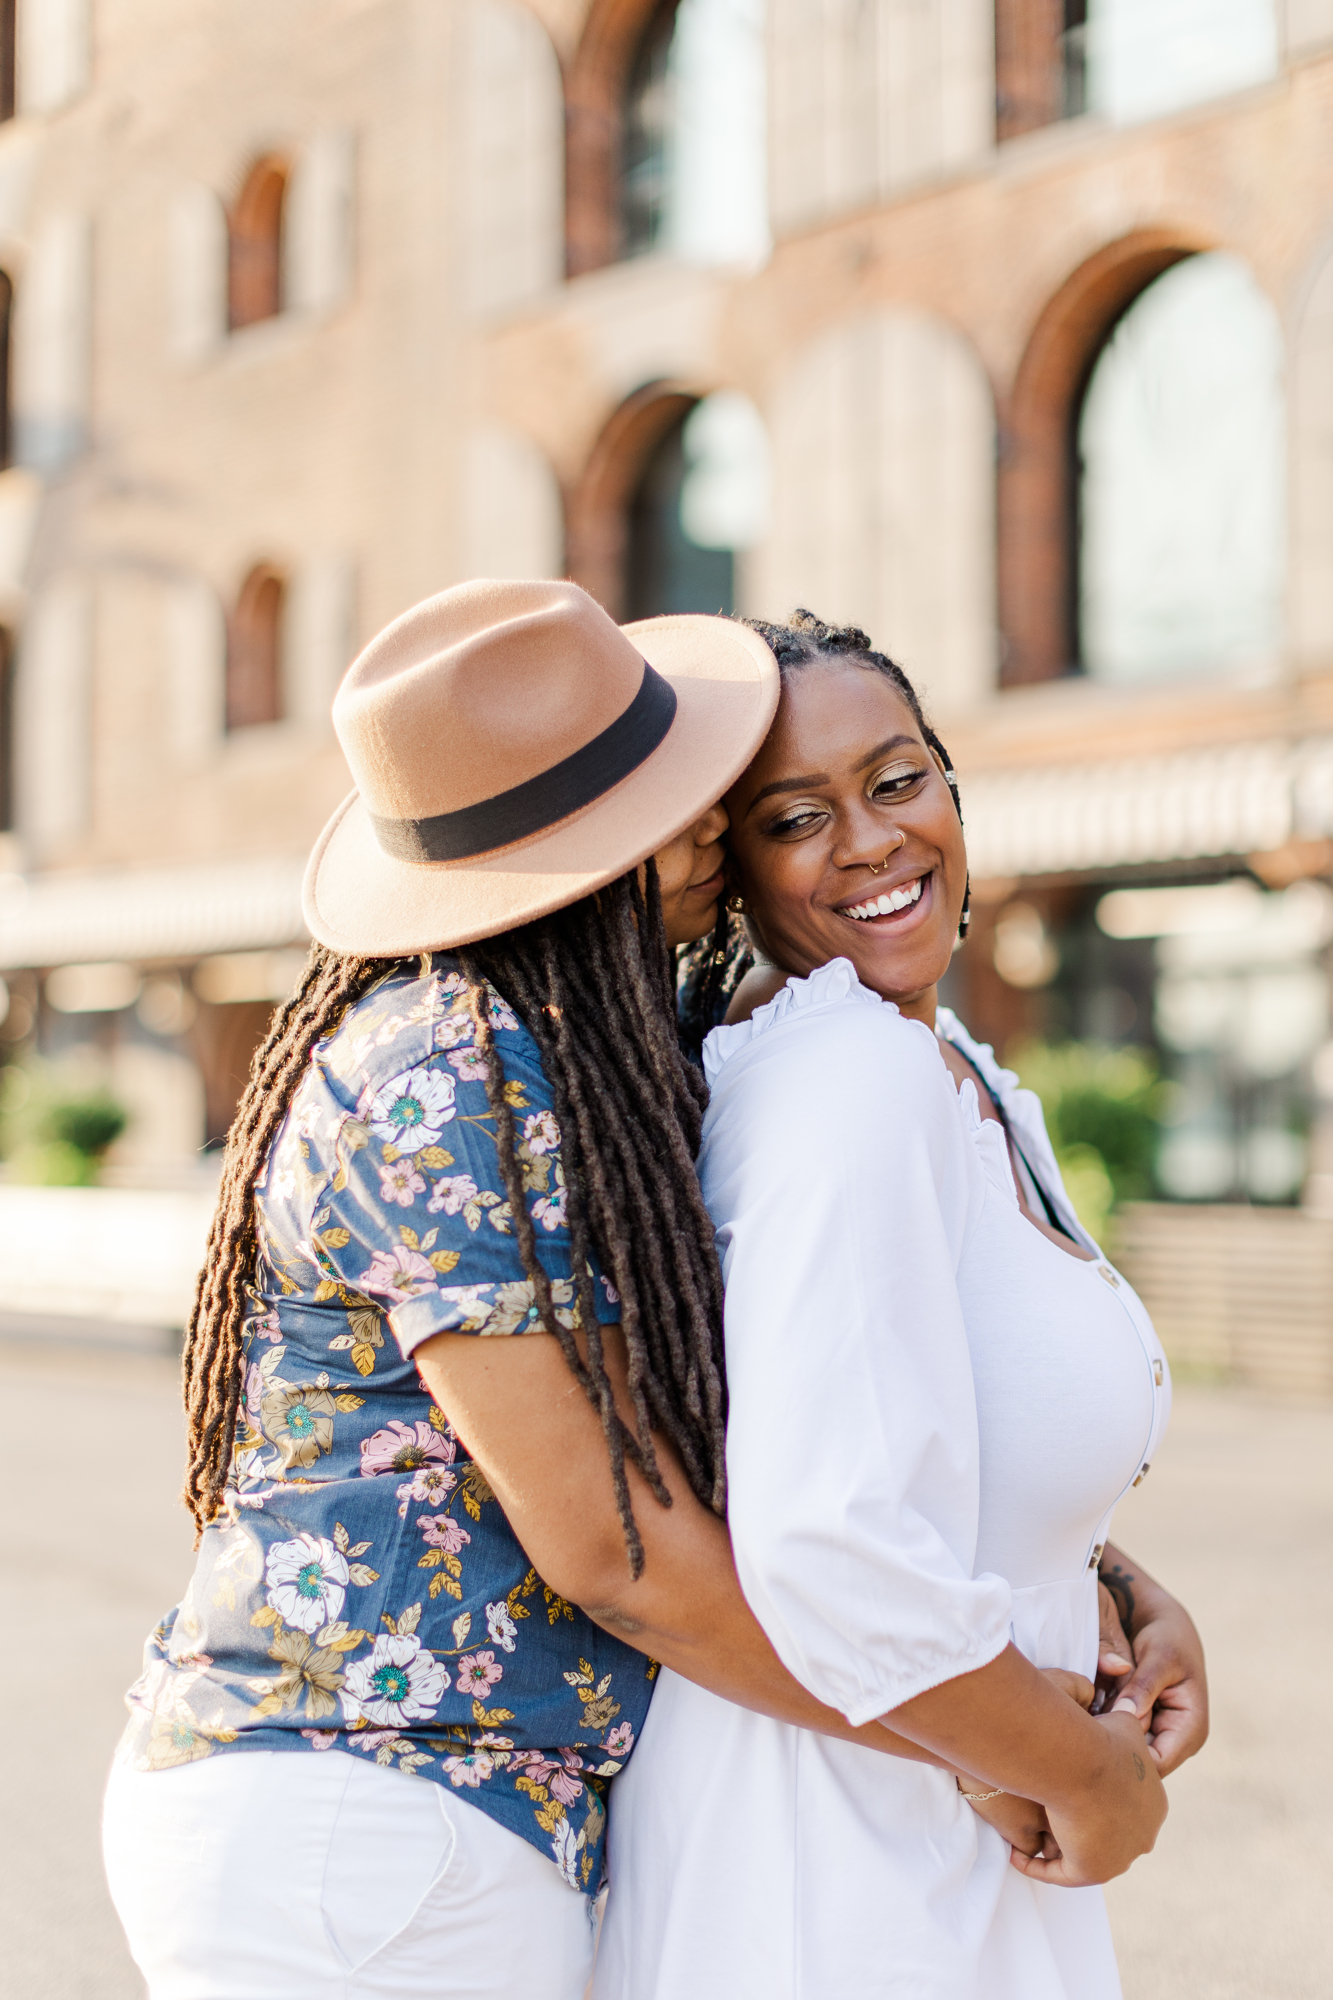 Radiant Summer Engagement Photography in DUMBO